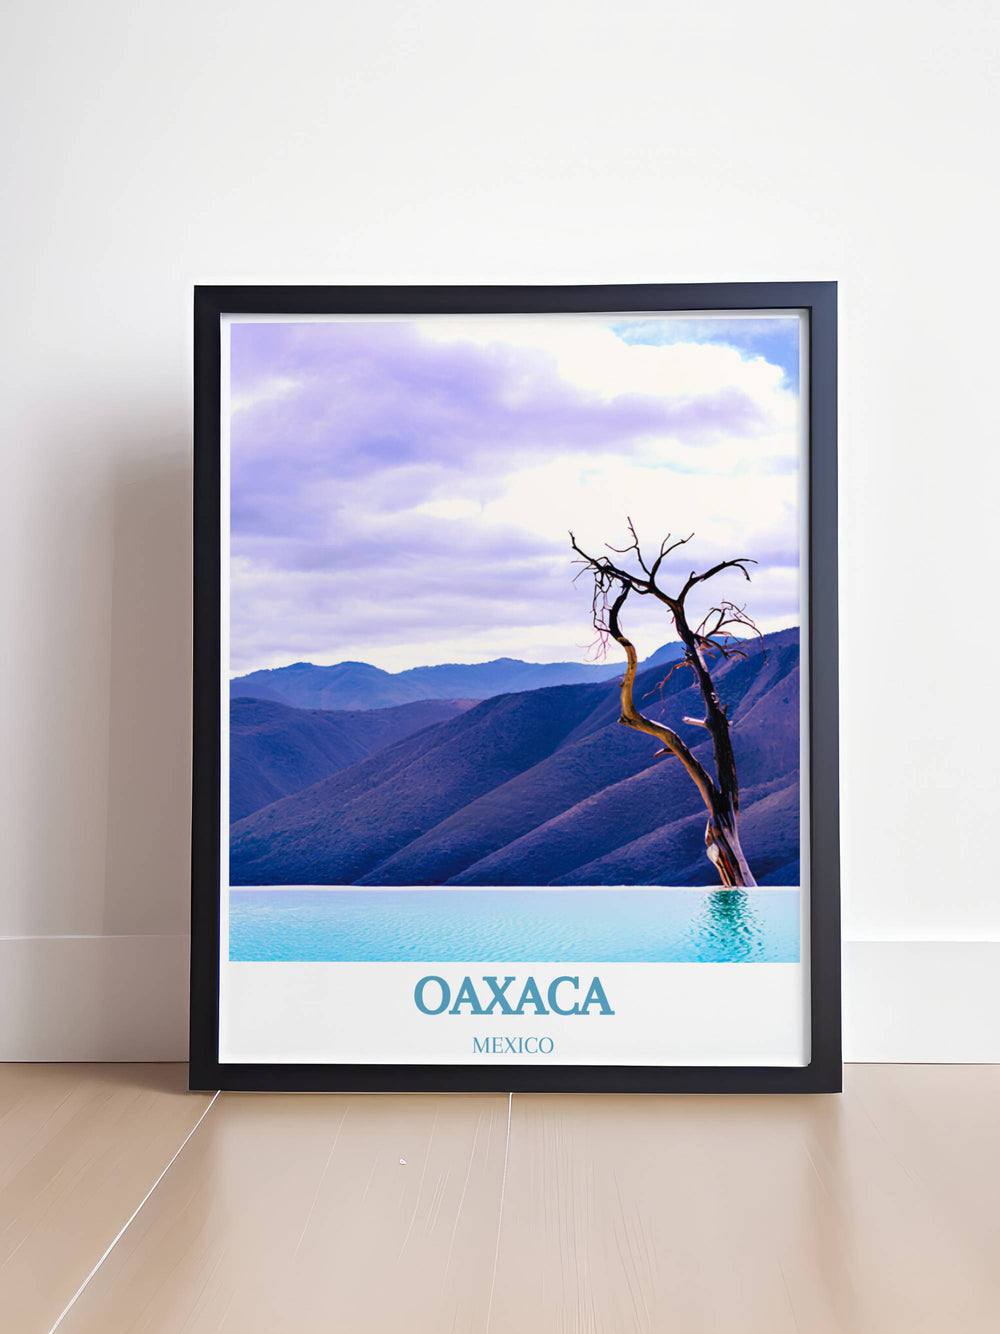 Home decor featuring vibrant scenes from Oaxaca, Mexico, ideal for bringing cultural richness and color into your living space.